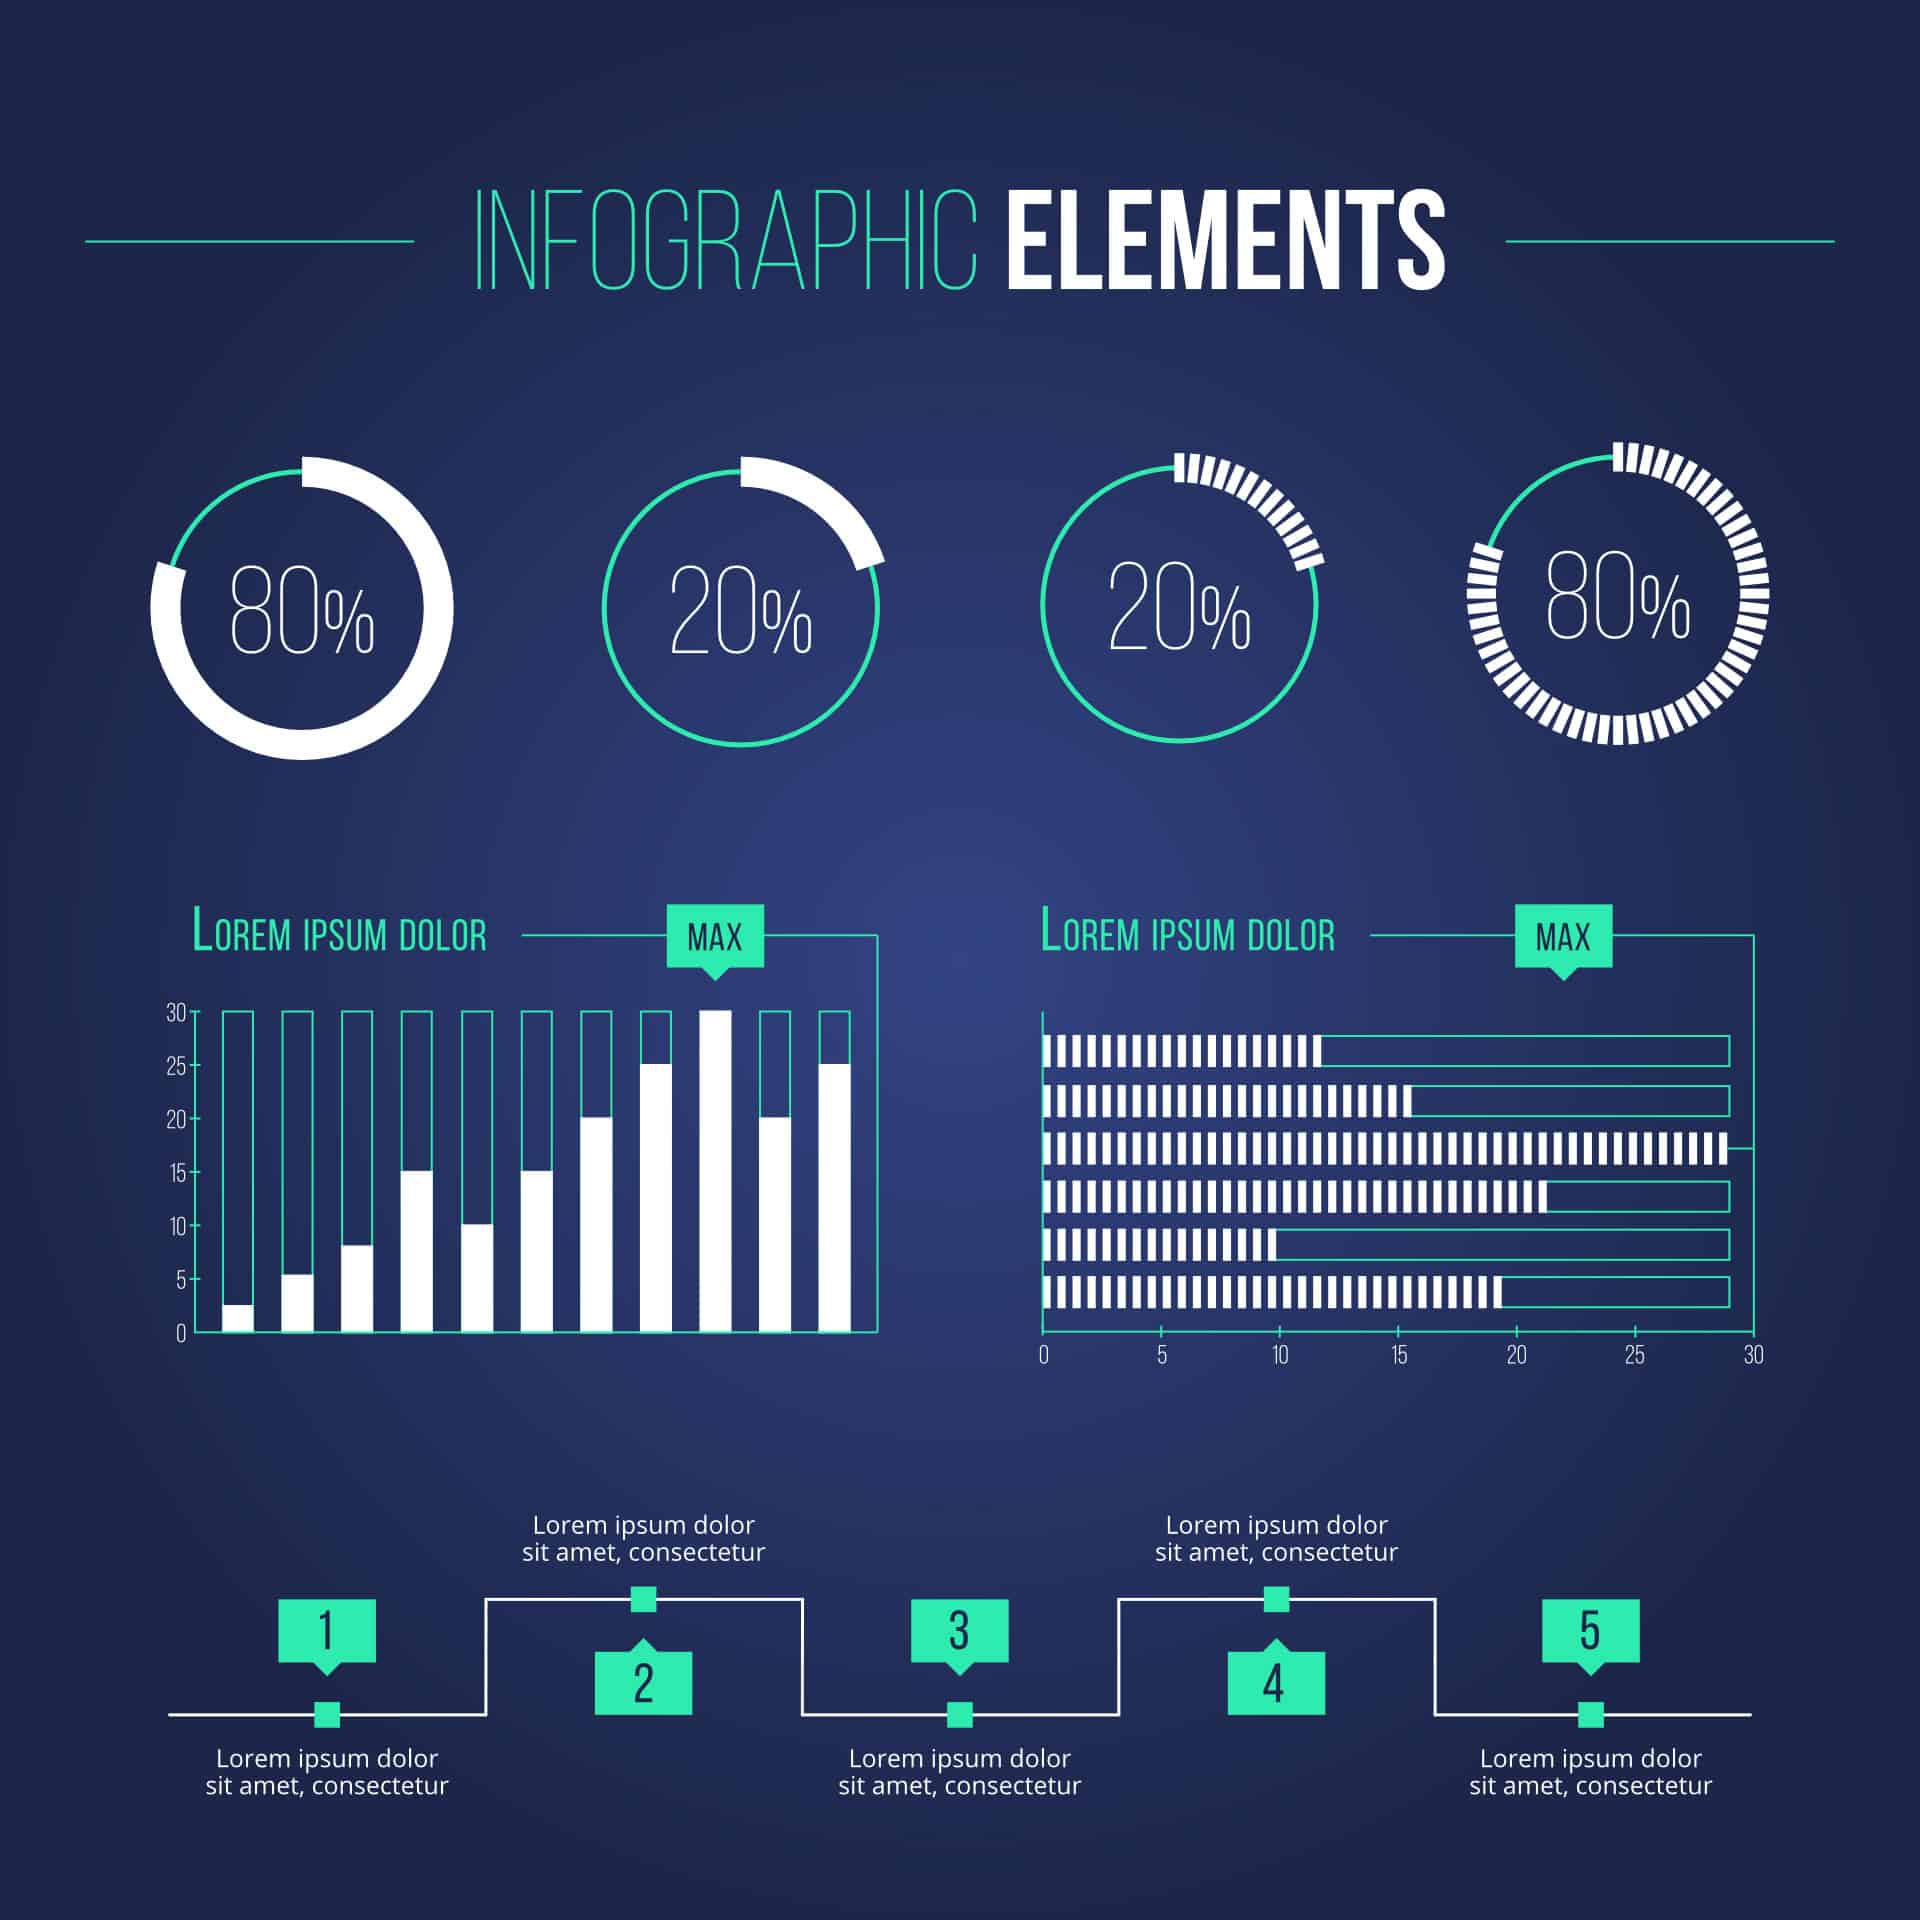 Why You Should Use More Infographics in Marketing